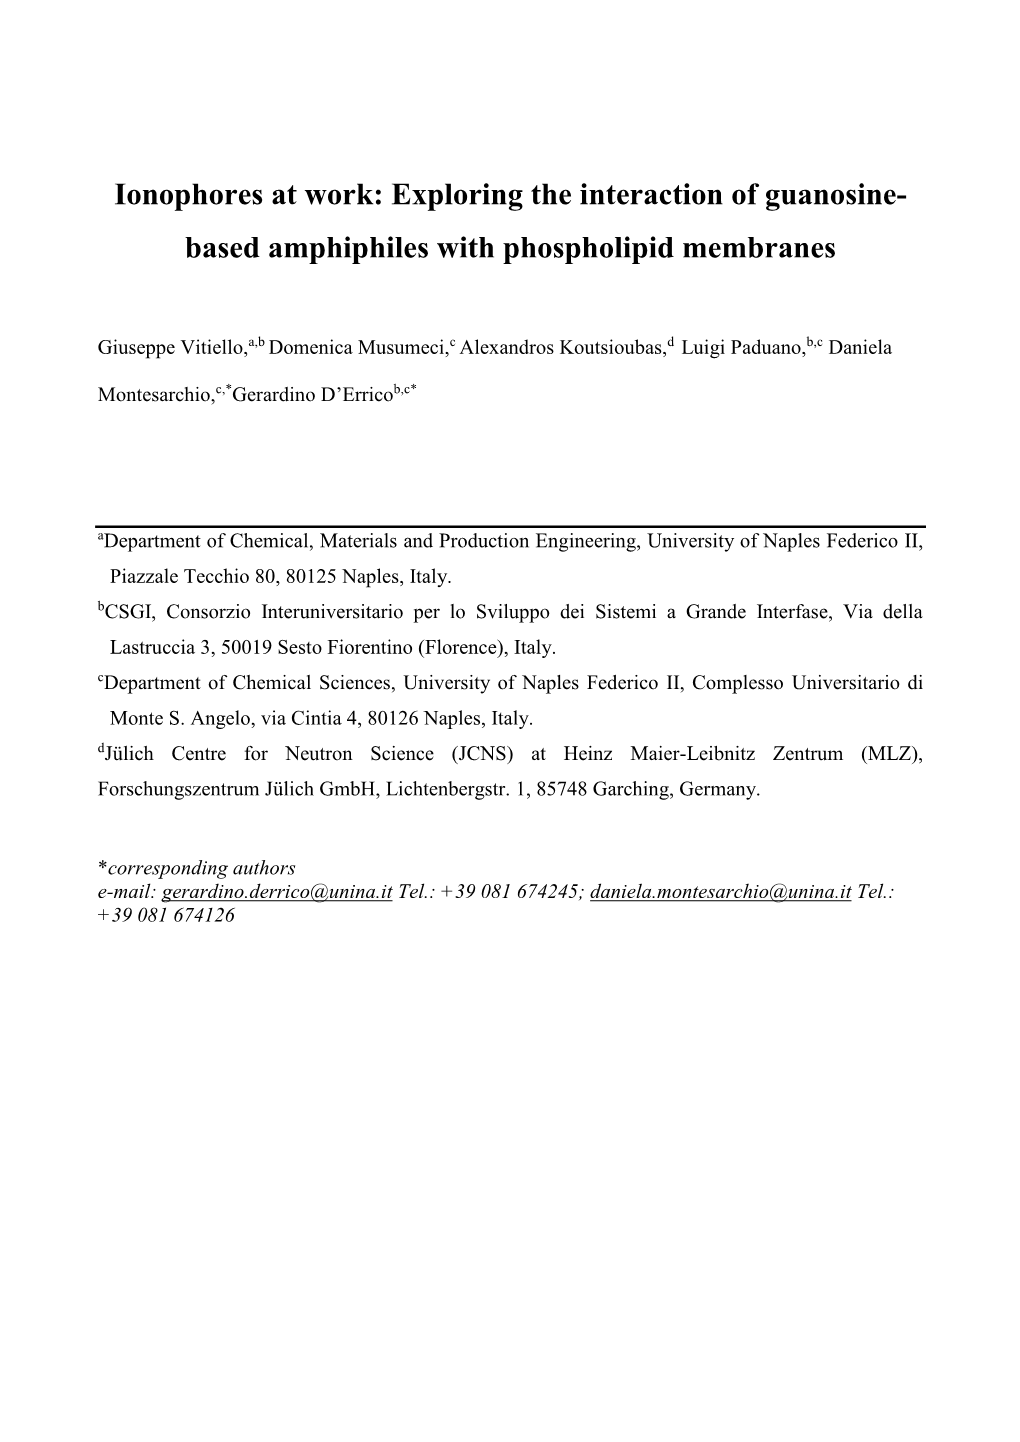 Ionophores at Work: Exploring the Interaction of Guanosine- Based Amphiphiles with Phospholipid Membranes